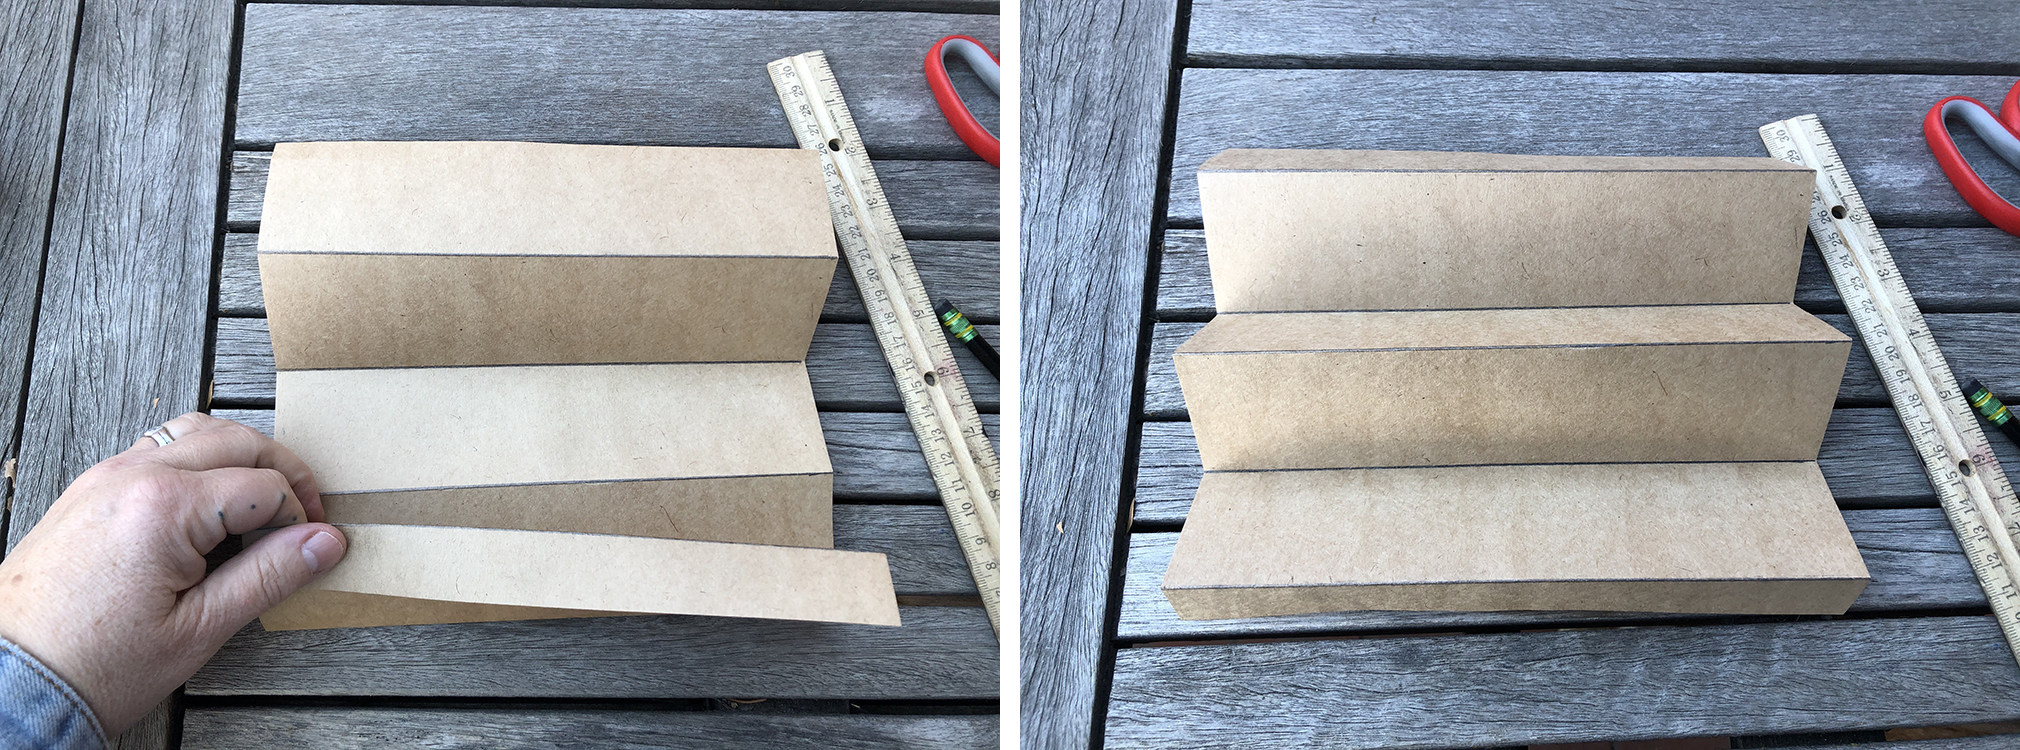 craft paper accordion folded into 6 sections 